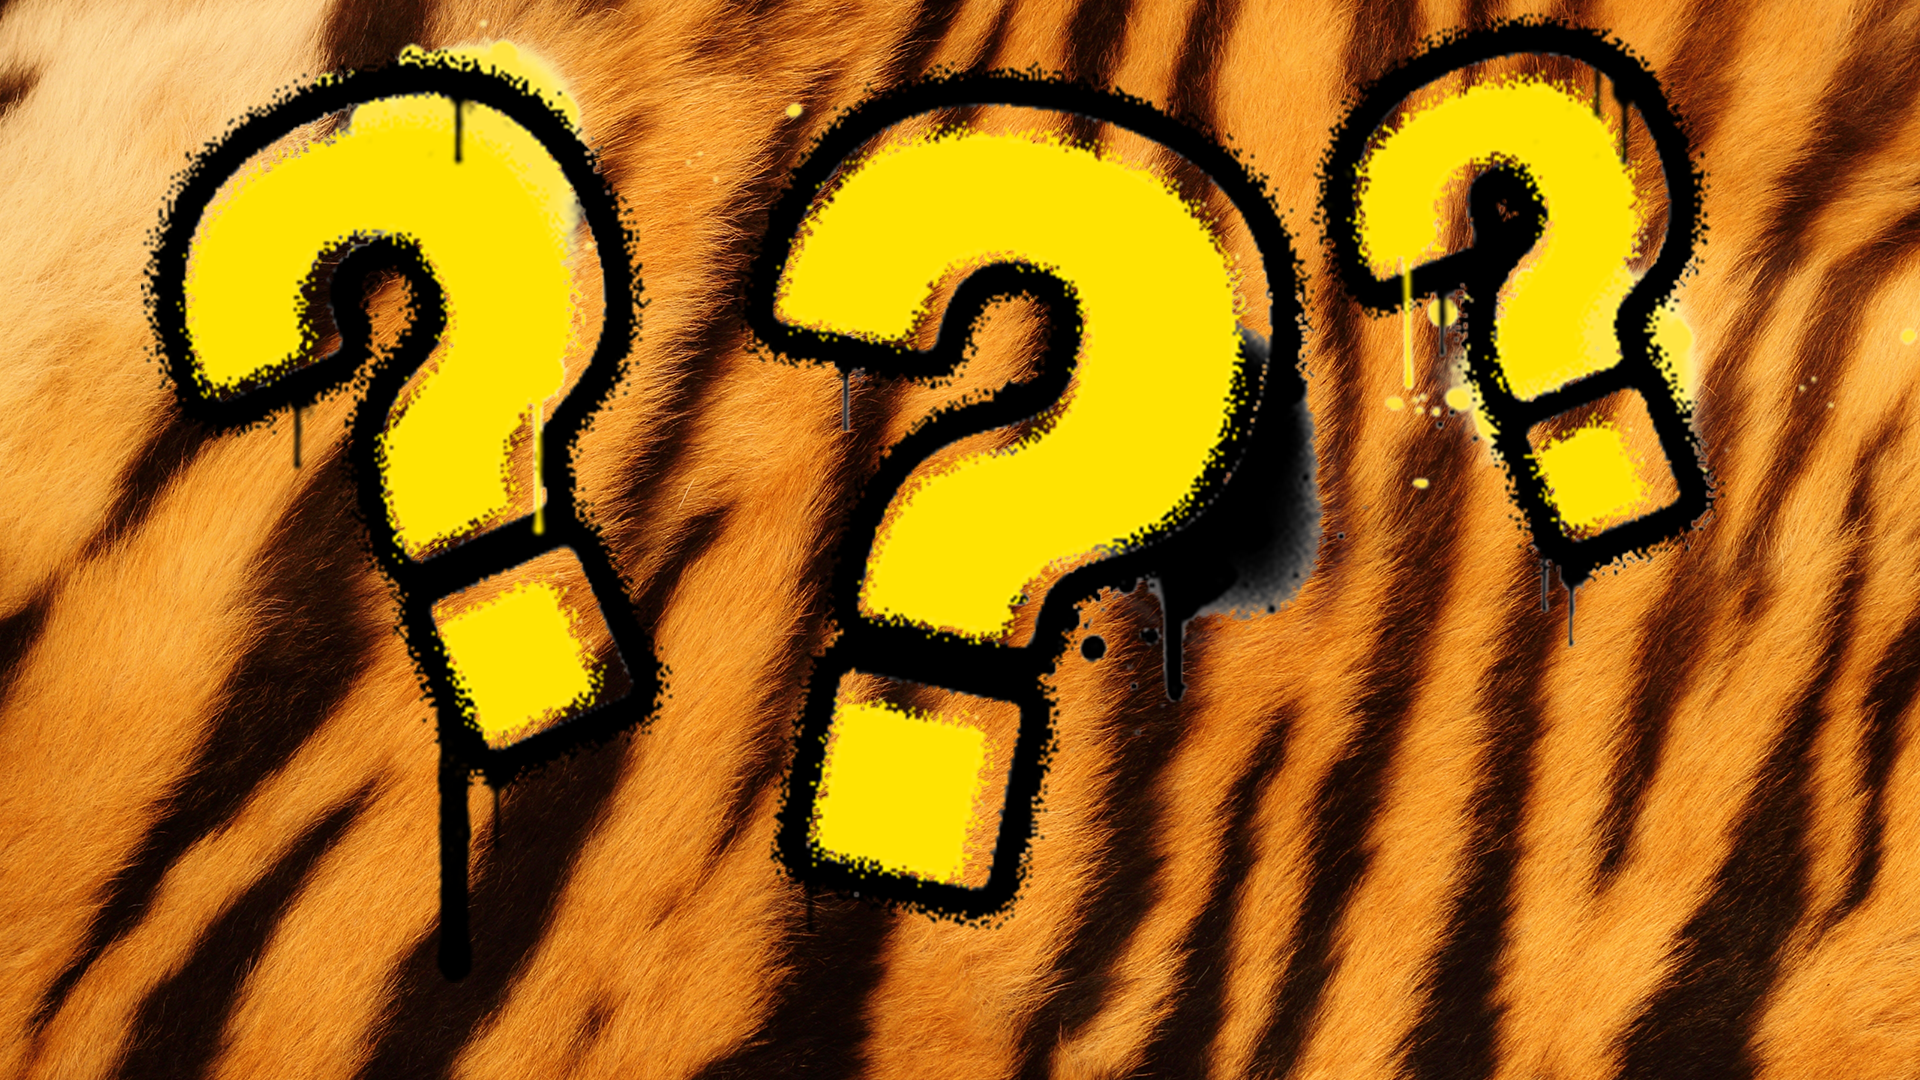 Tiger stripe background and question marks